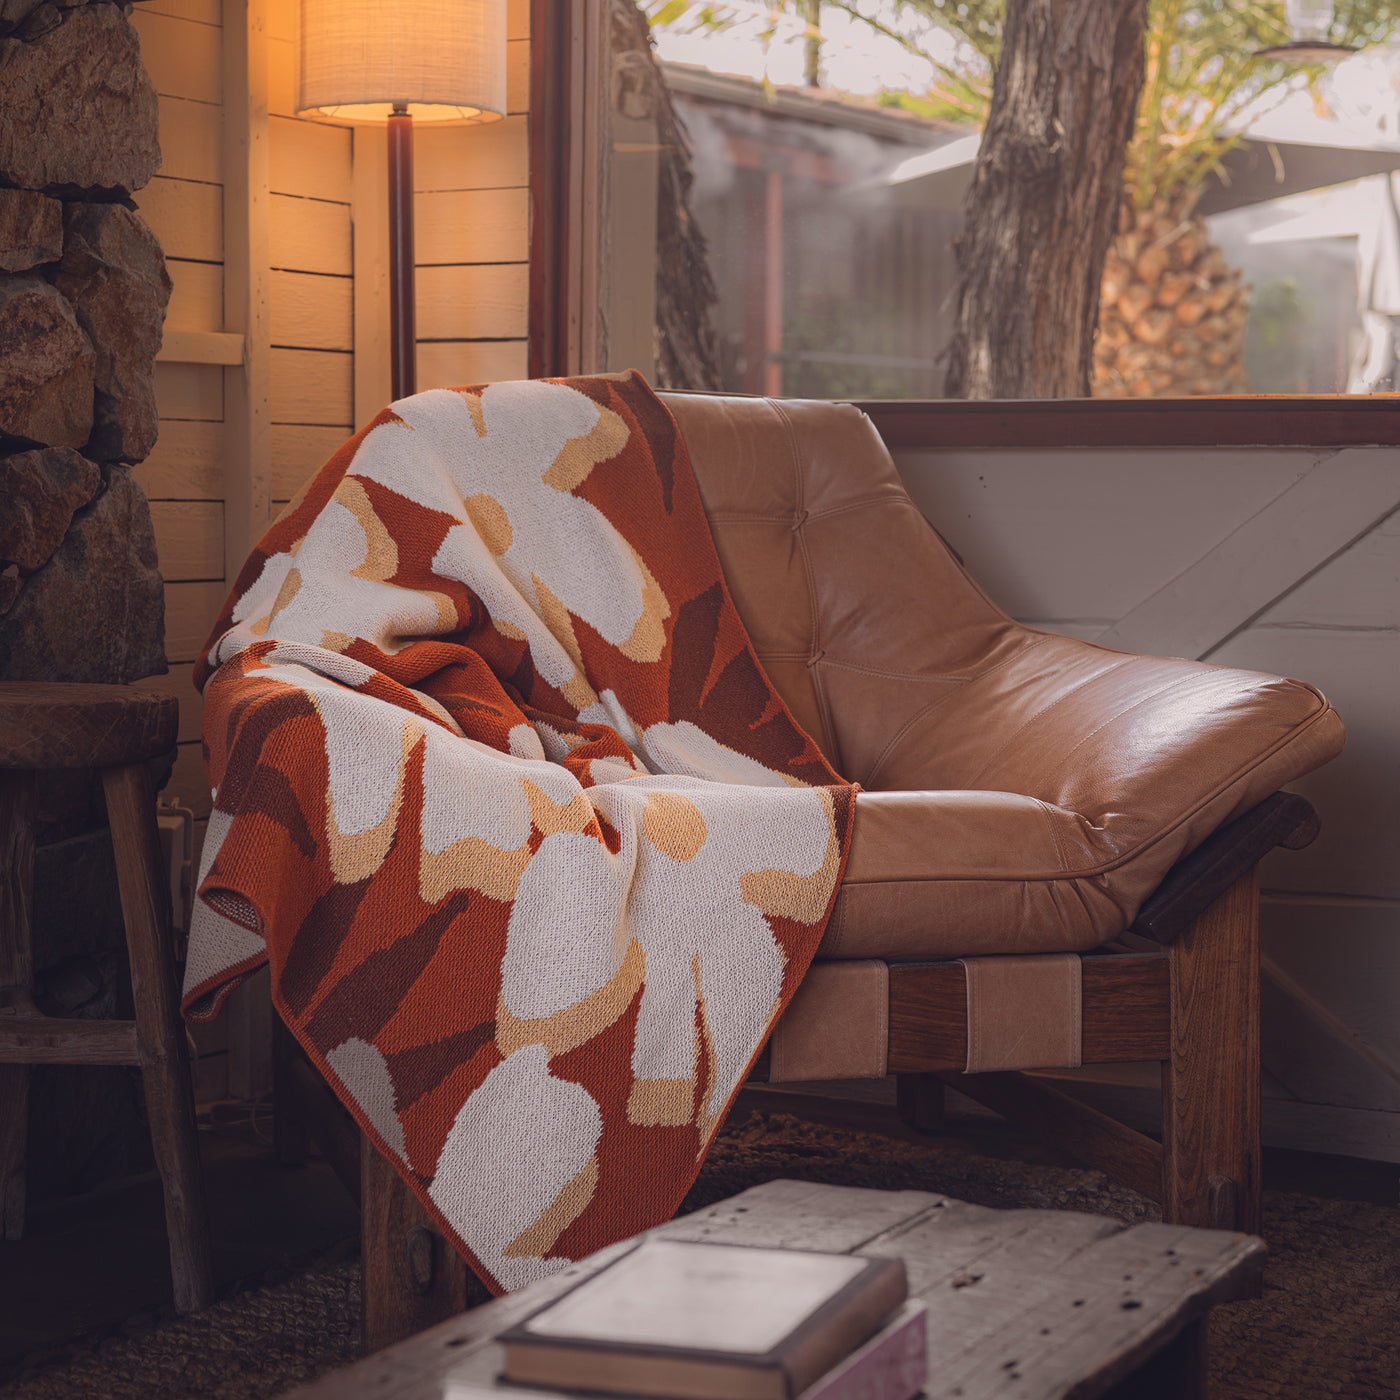 Rust Flower Throw Blanket on Camel Leather Chair